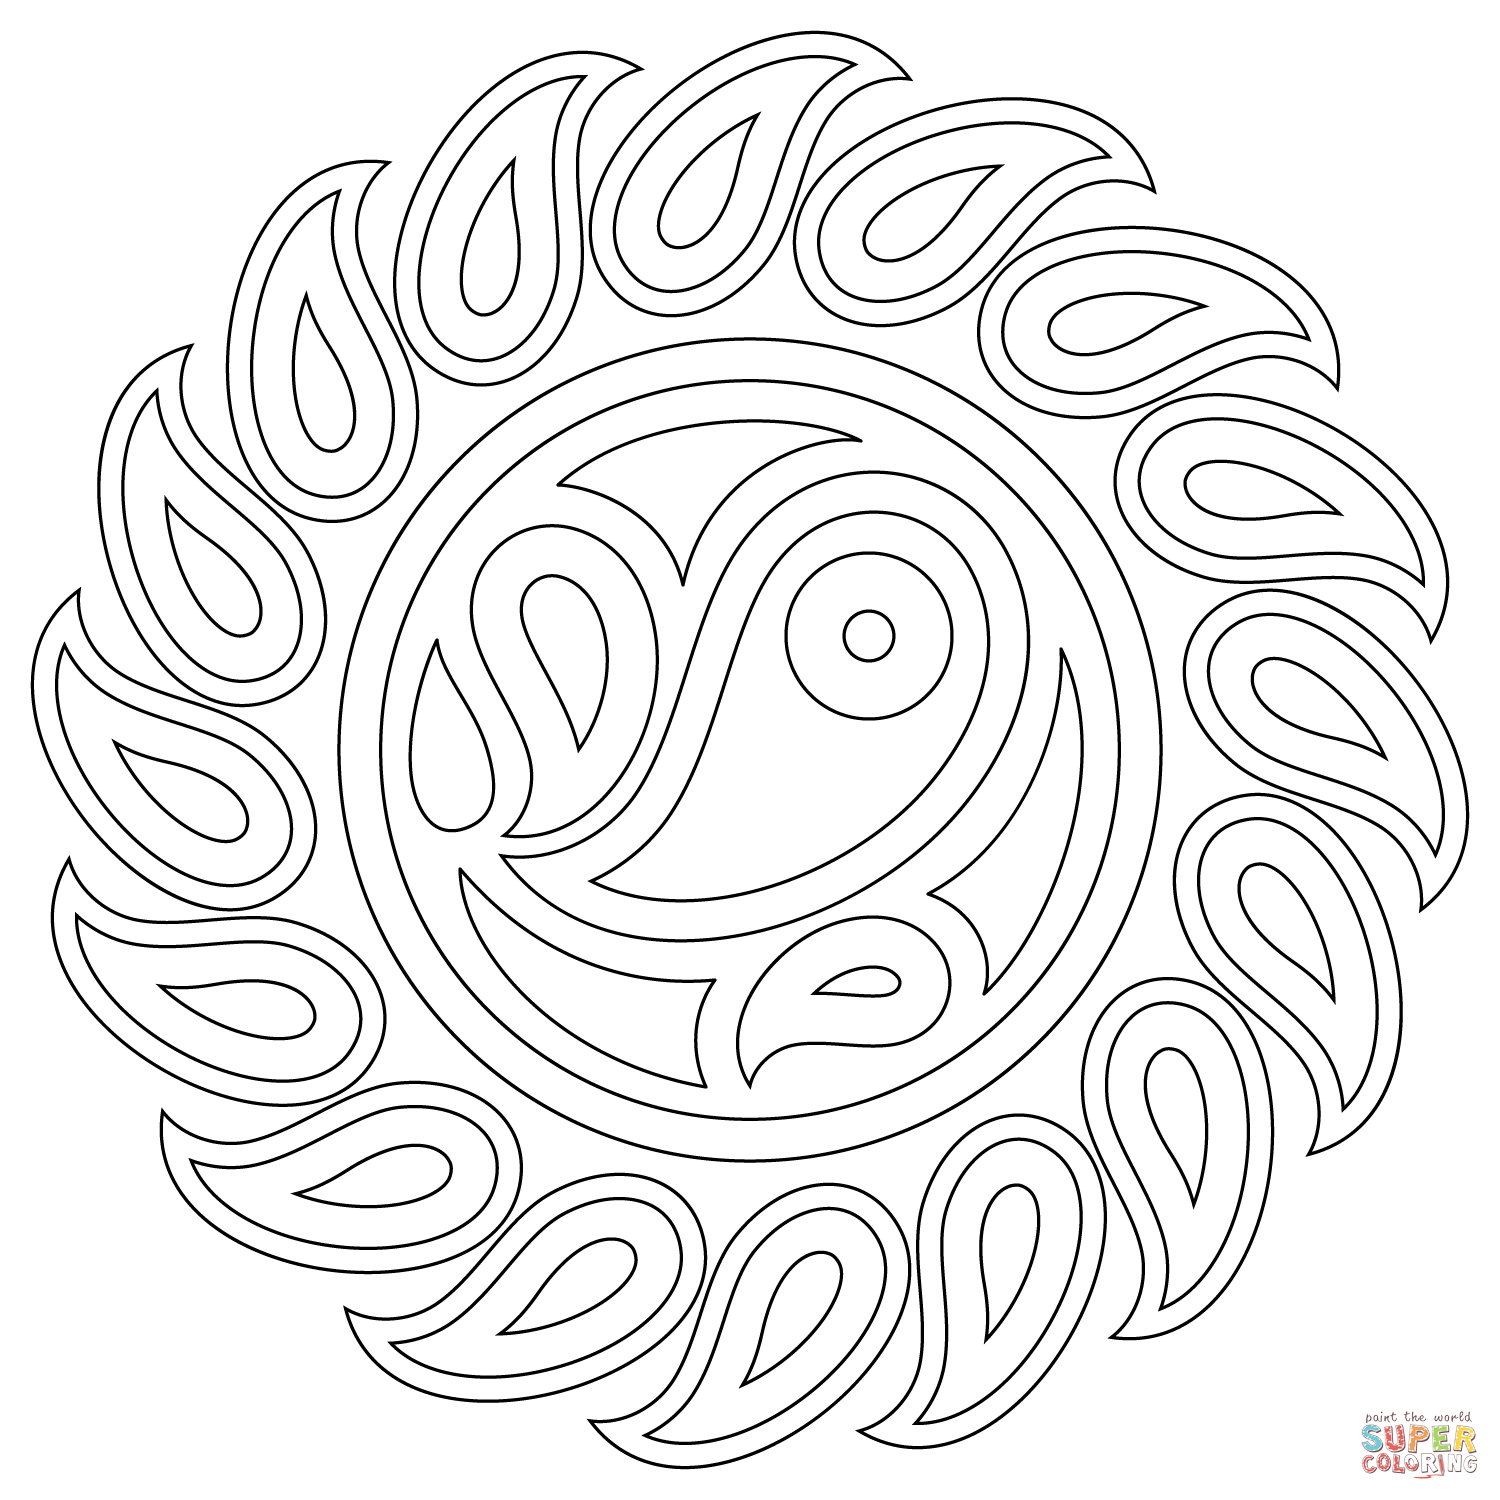 Coloring Pages : Paisley Mandala Coloring Page Pages For Kids Simple - Free Printable Mandala Coloring Pages For Adults